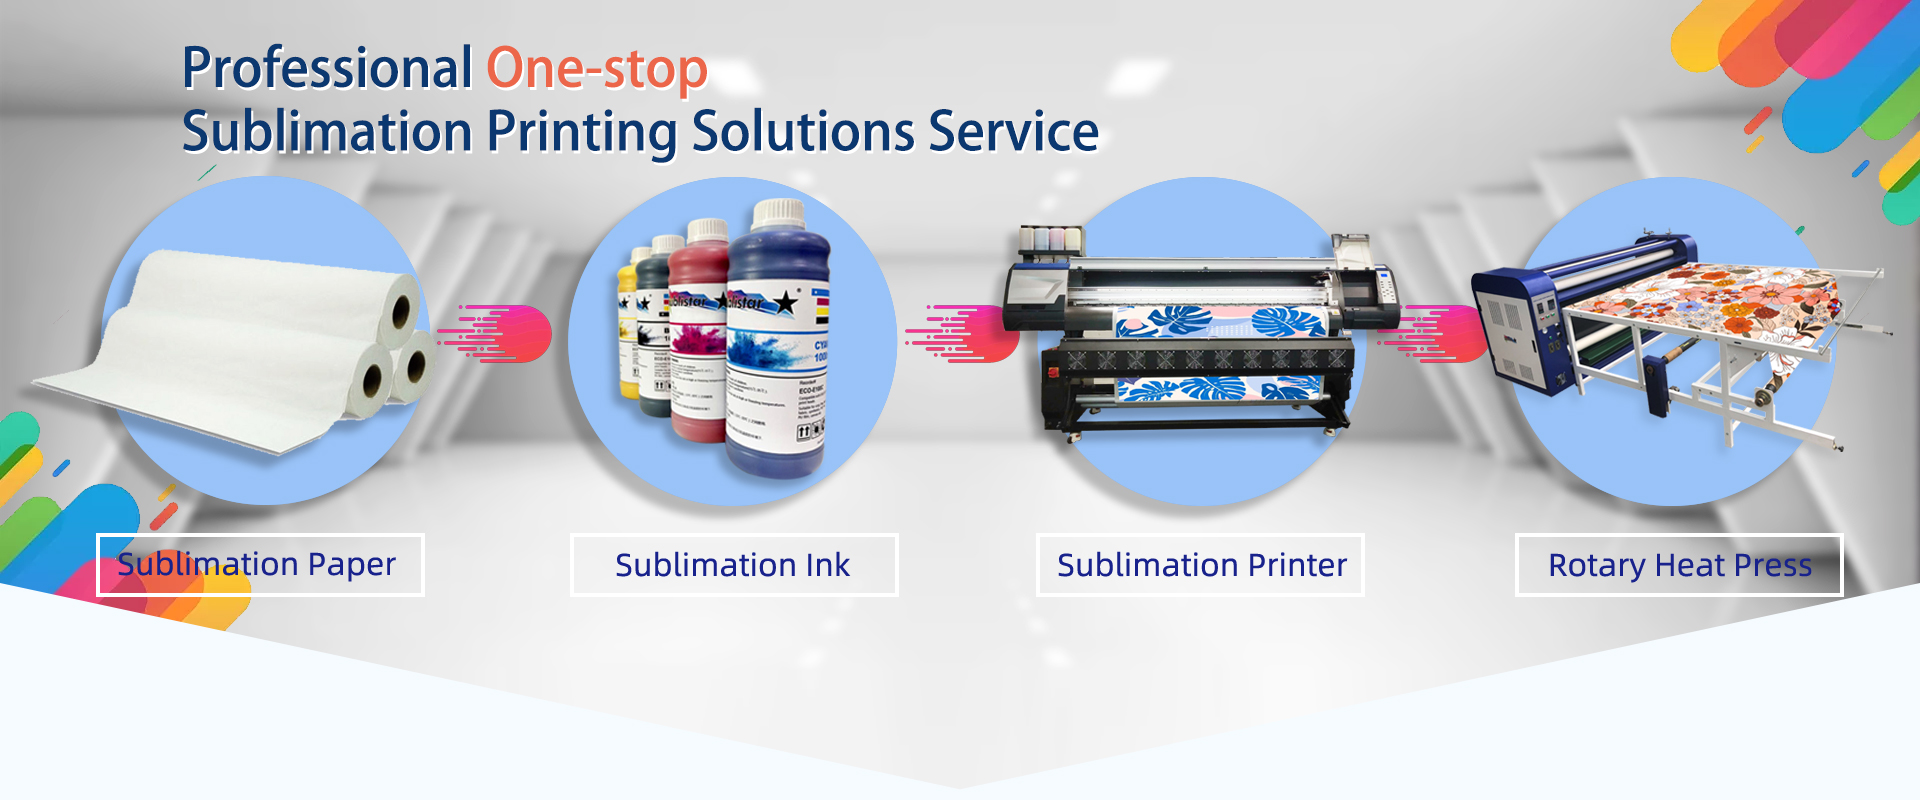 S2508 Industrial Sublimation Printer with S3200 Print heads